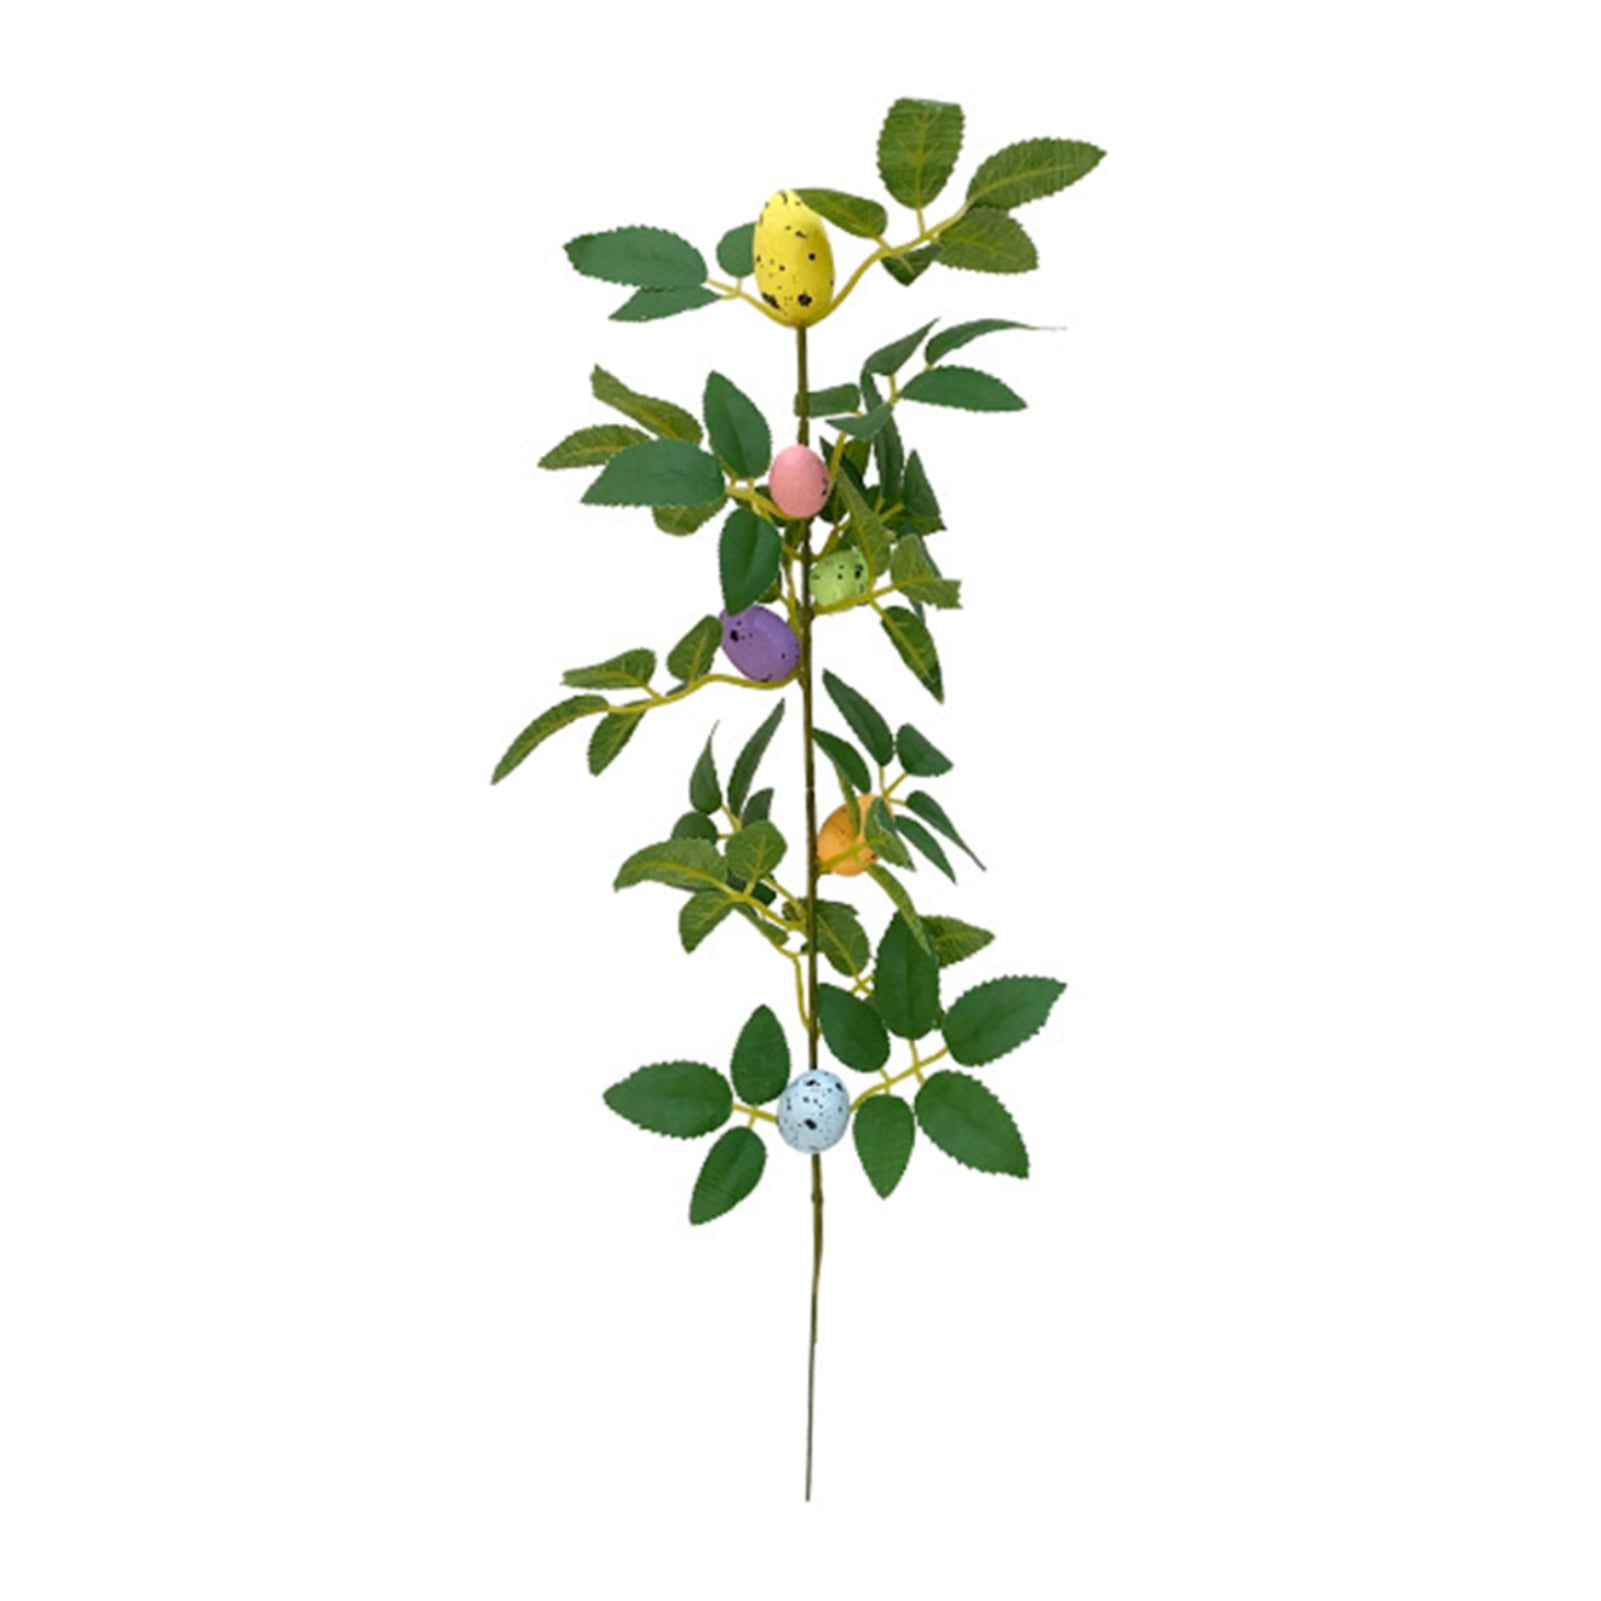 NEW 6pcs Artificial Easter Floral Stems Branches With Easter Eggs Berries  For Arrangement Centerpiece Wreath Decor